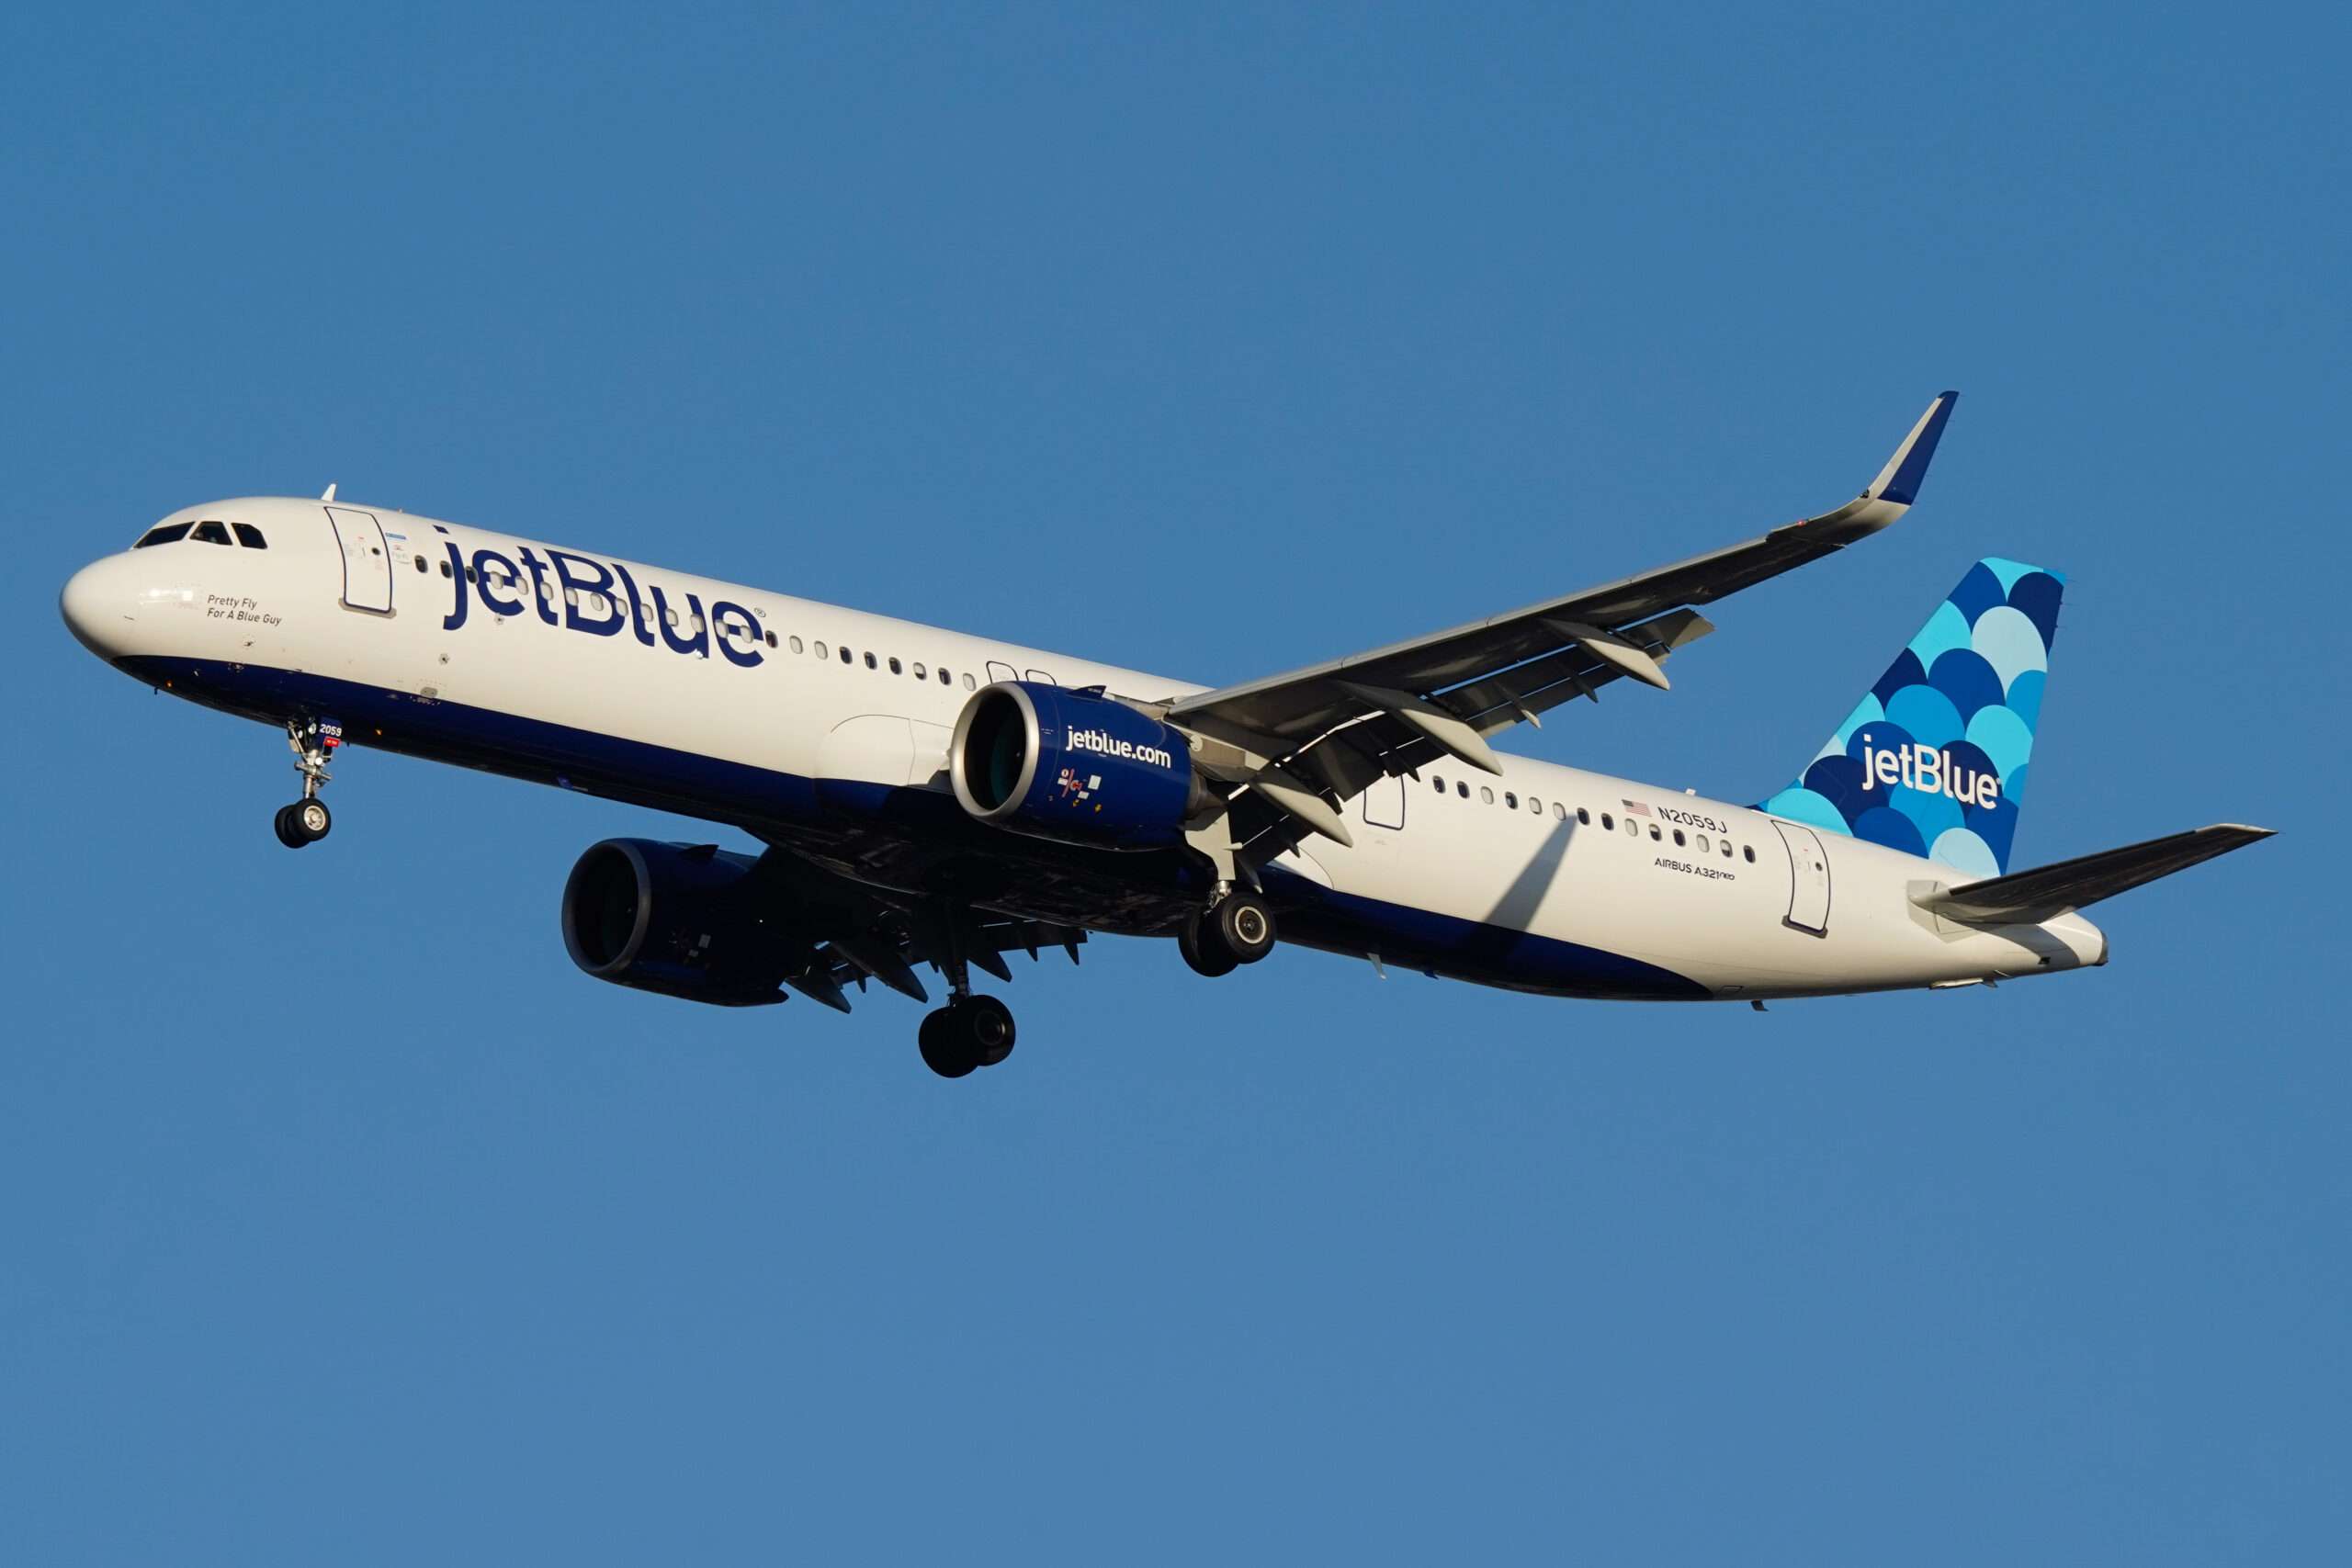 Amid the controversy of flight operations being cut in Amsterdam Schiphol, JetBlue has called on the U.S Department of Transport to ban KLM from operating flights into New York as a result.